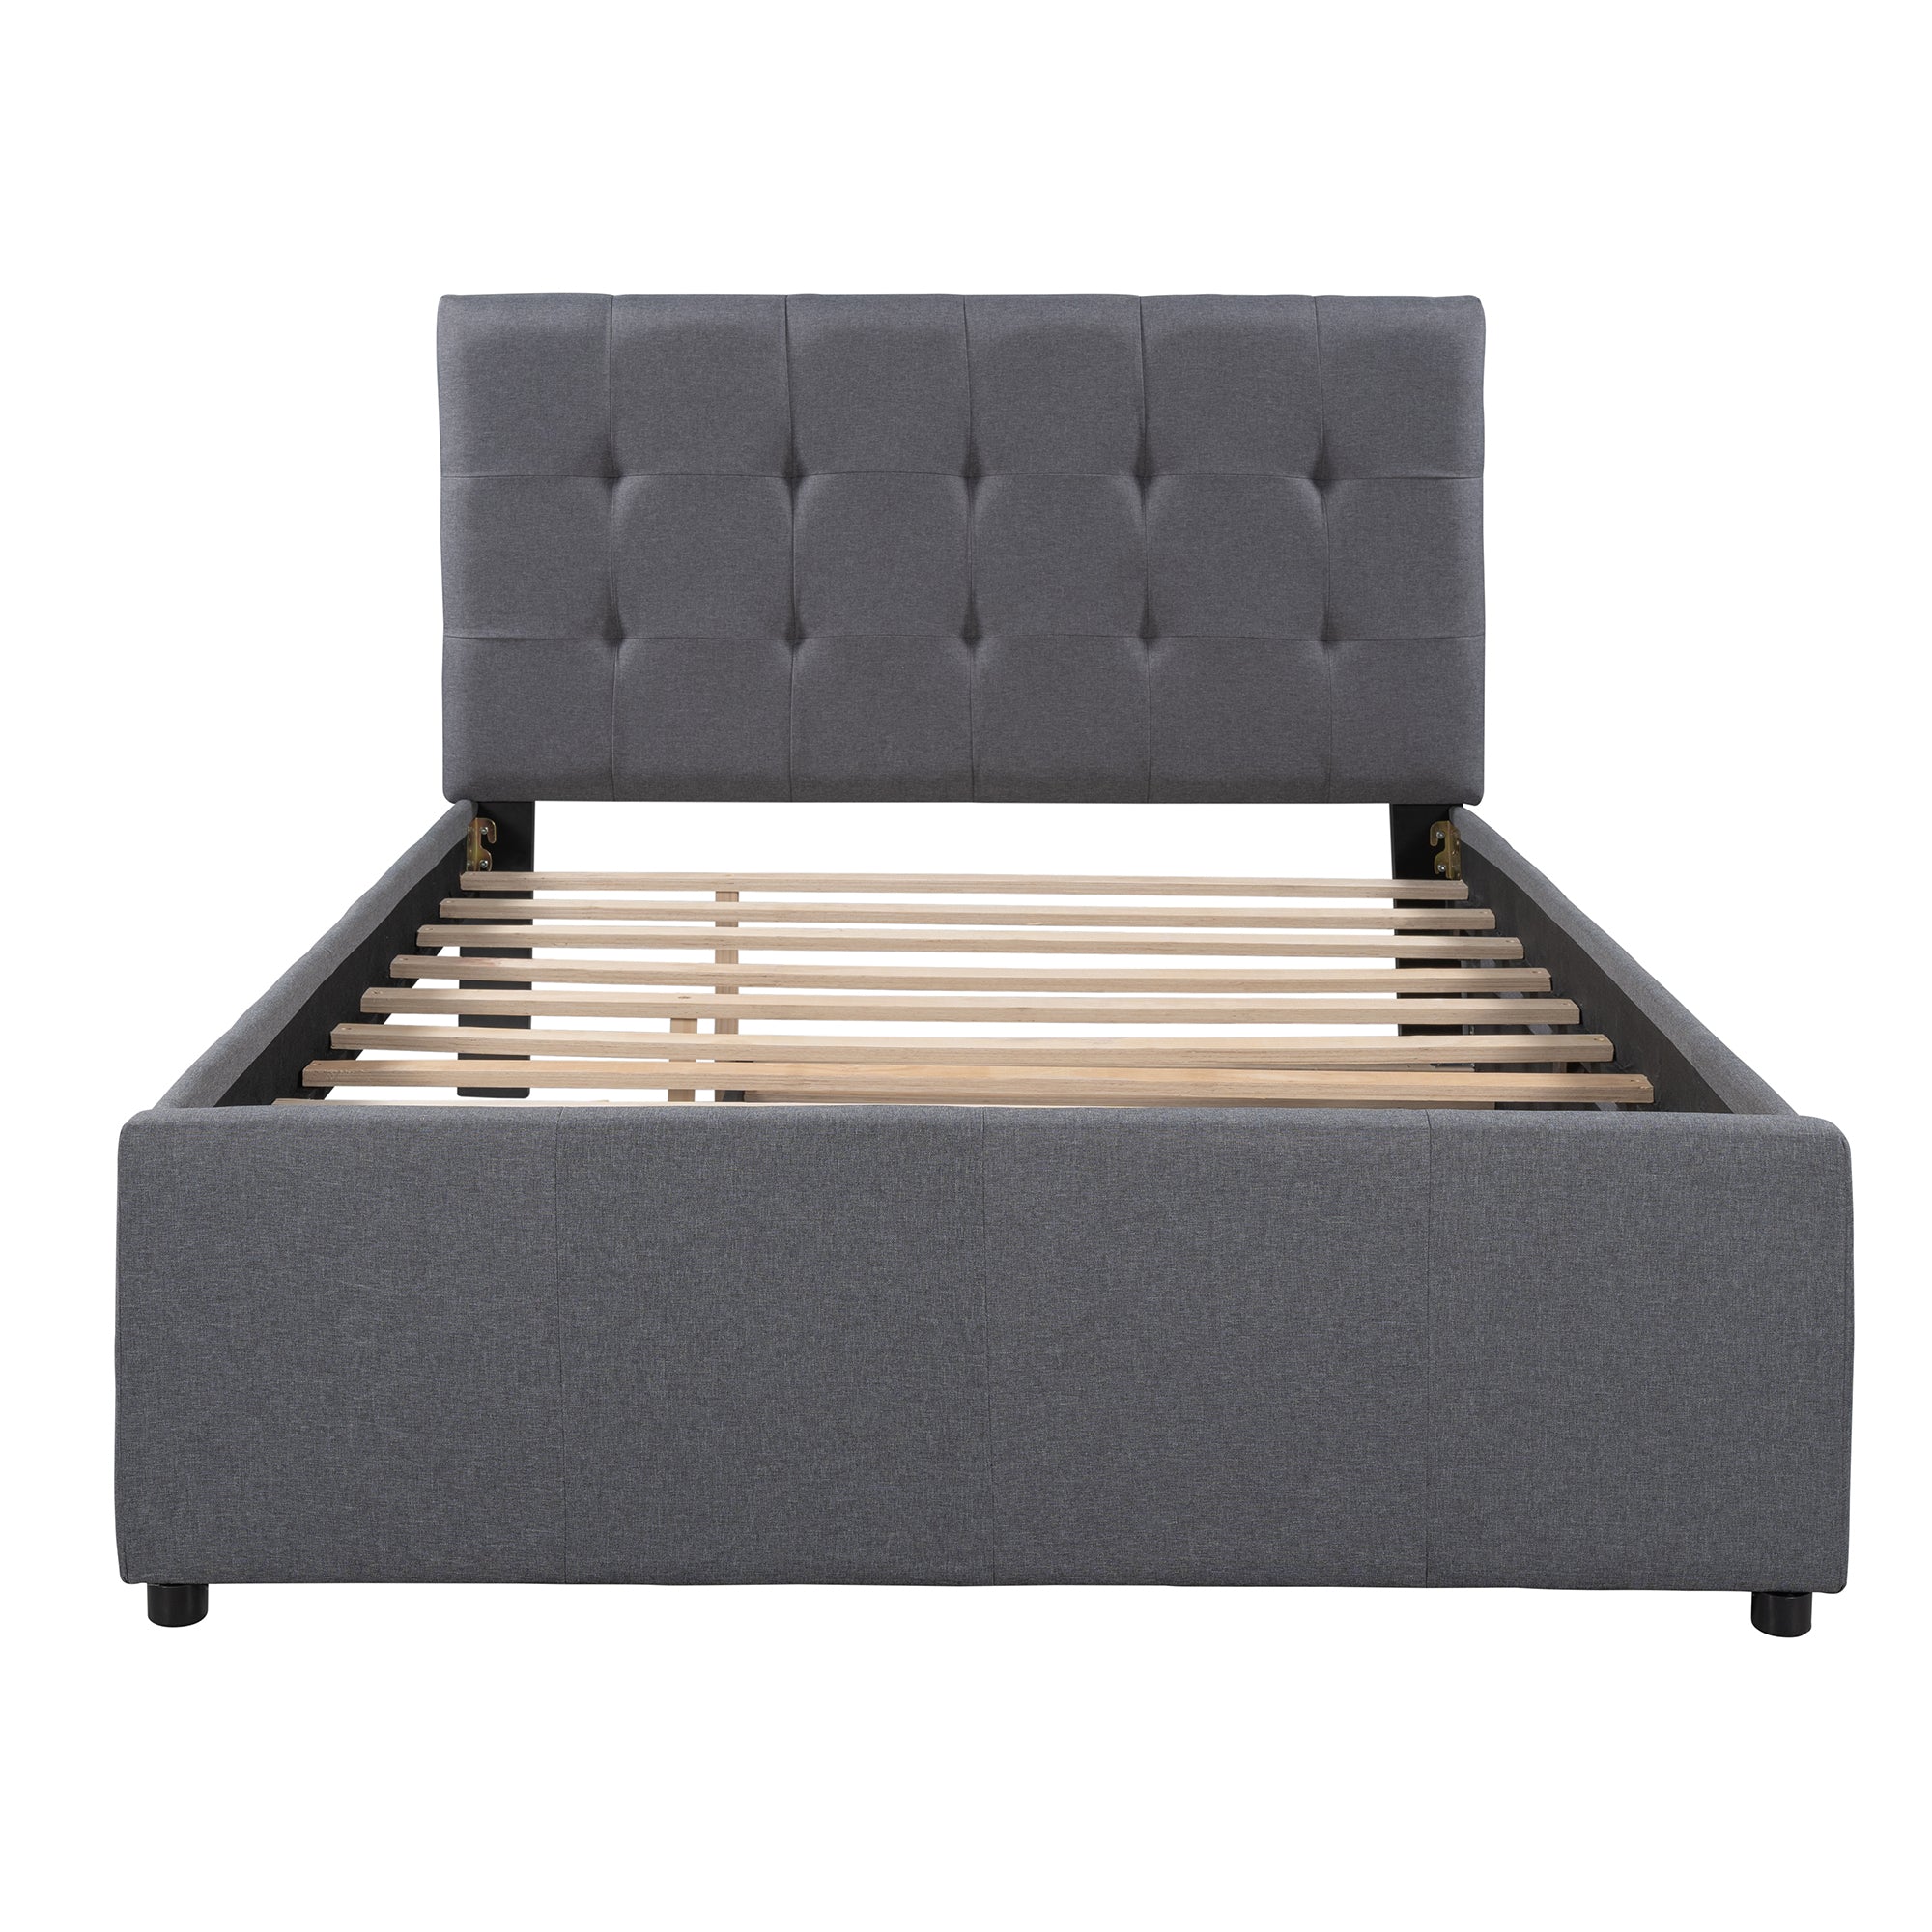 Linen Upholstered Bed Frame with Headboard and Trundle by: Alabama Beds